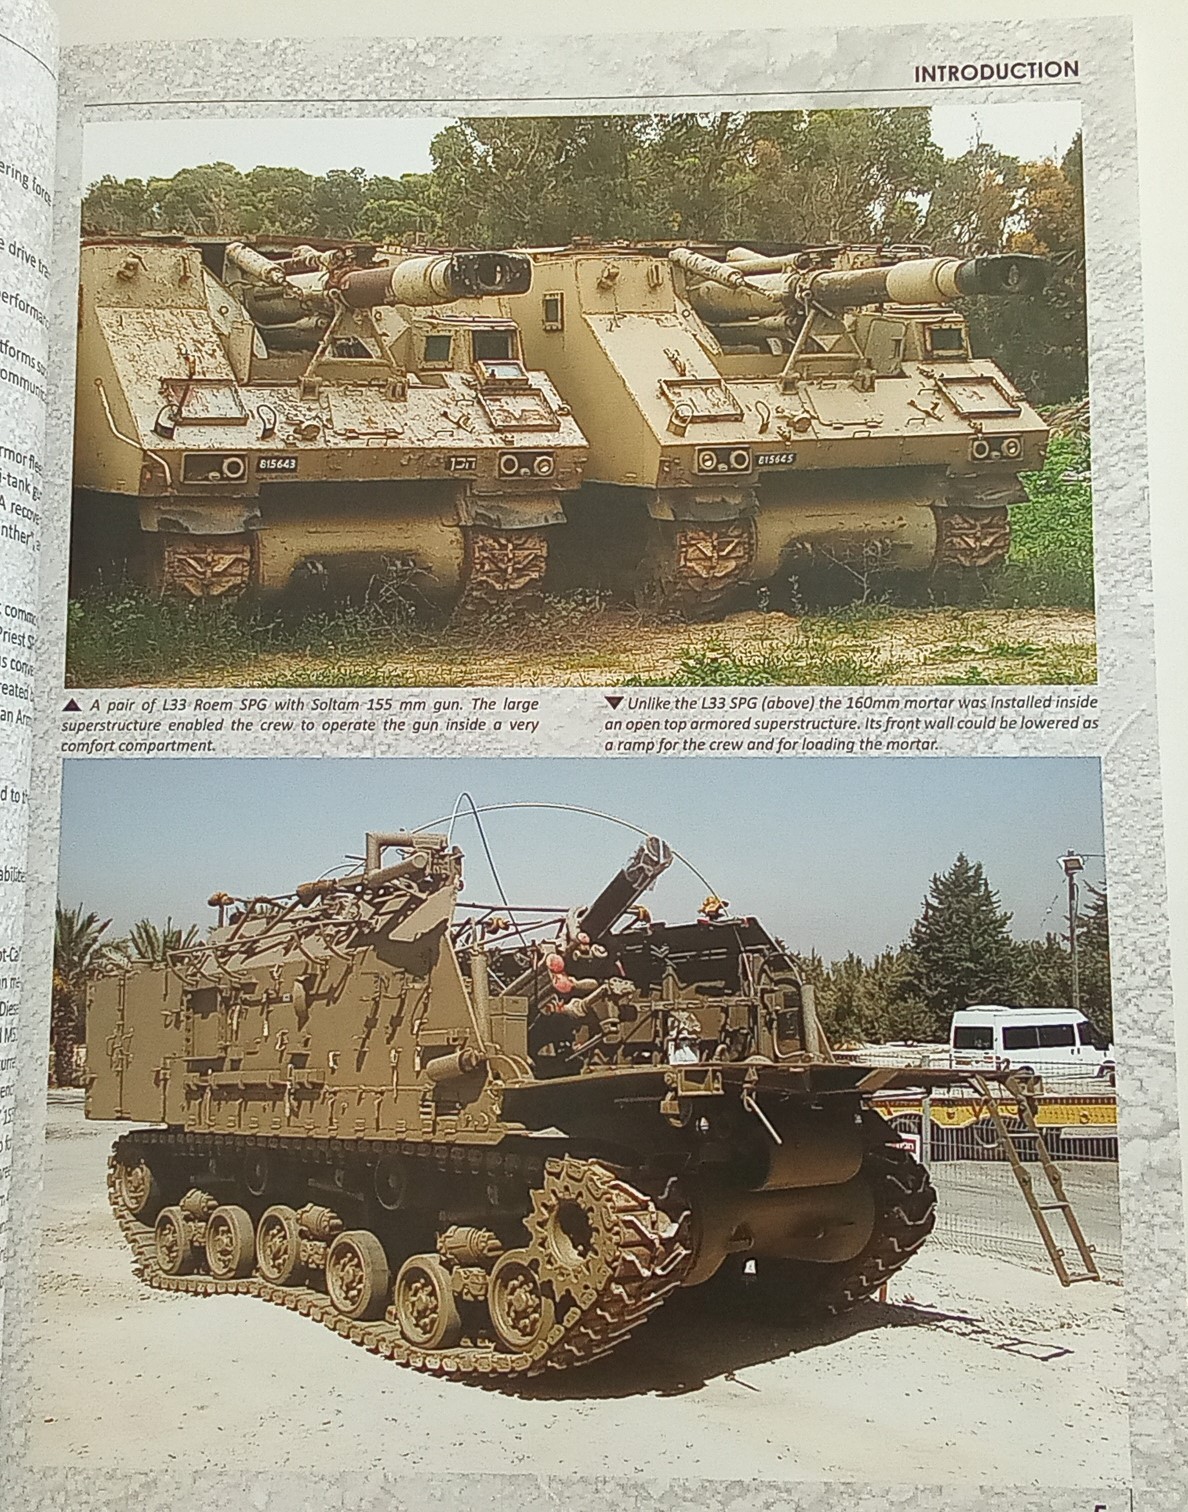 Part of the intro, illustrating the IDF habit of converting vehicles.